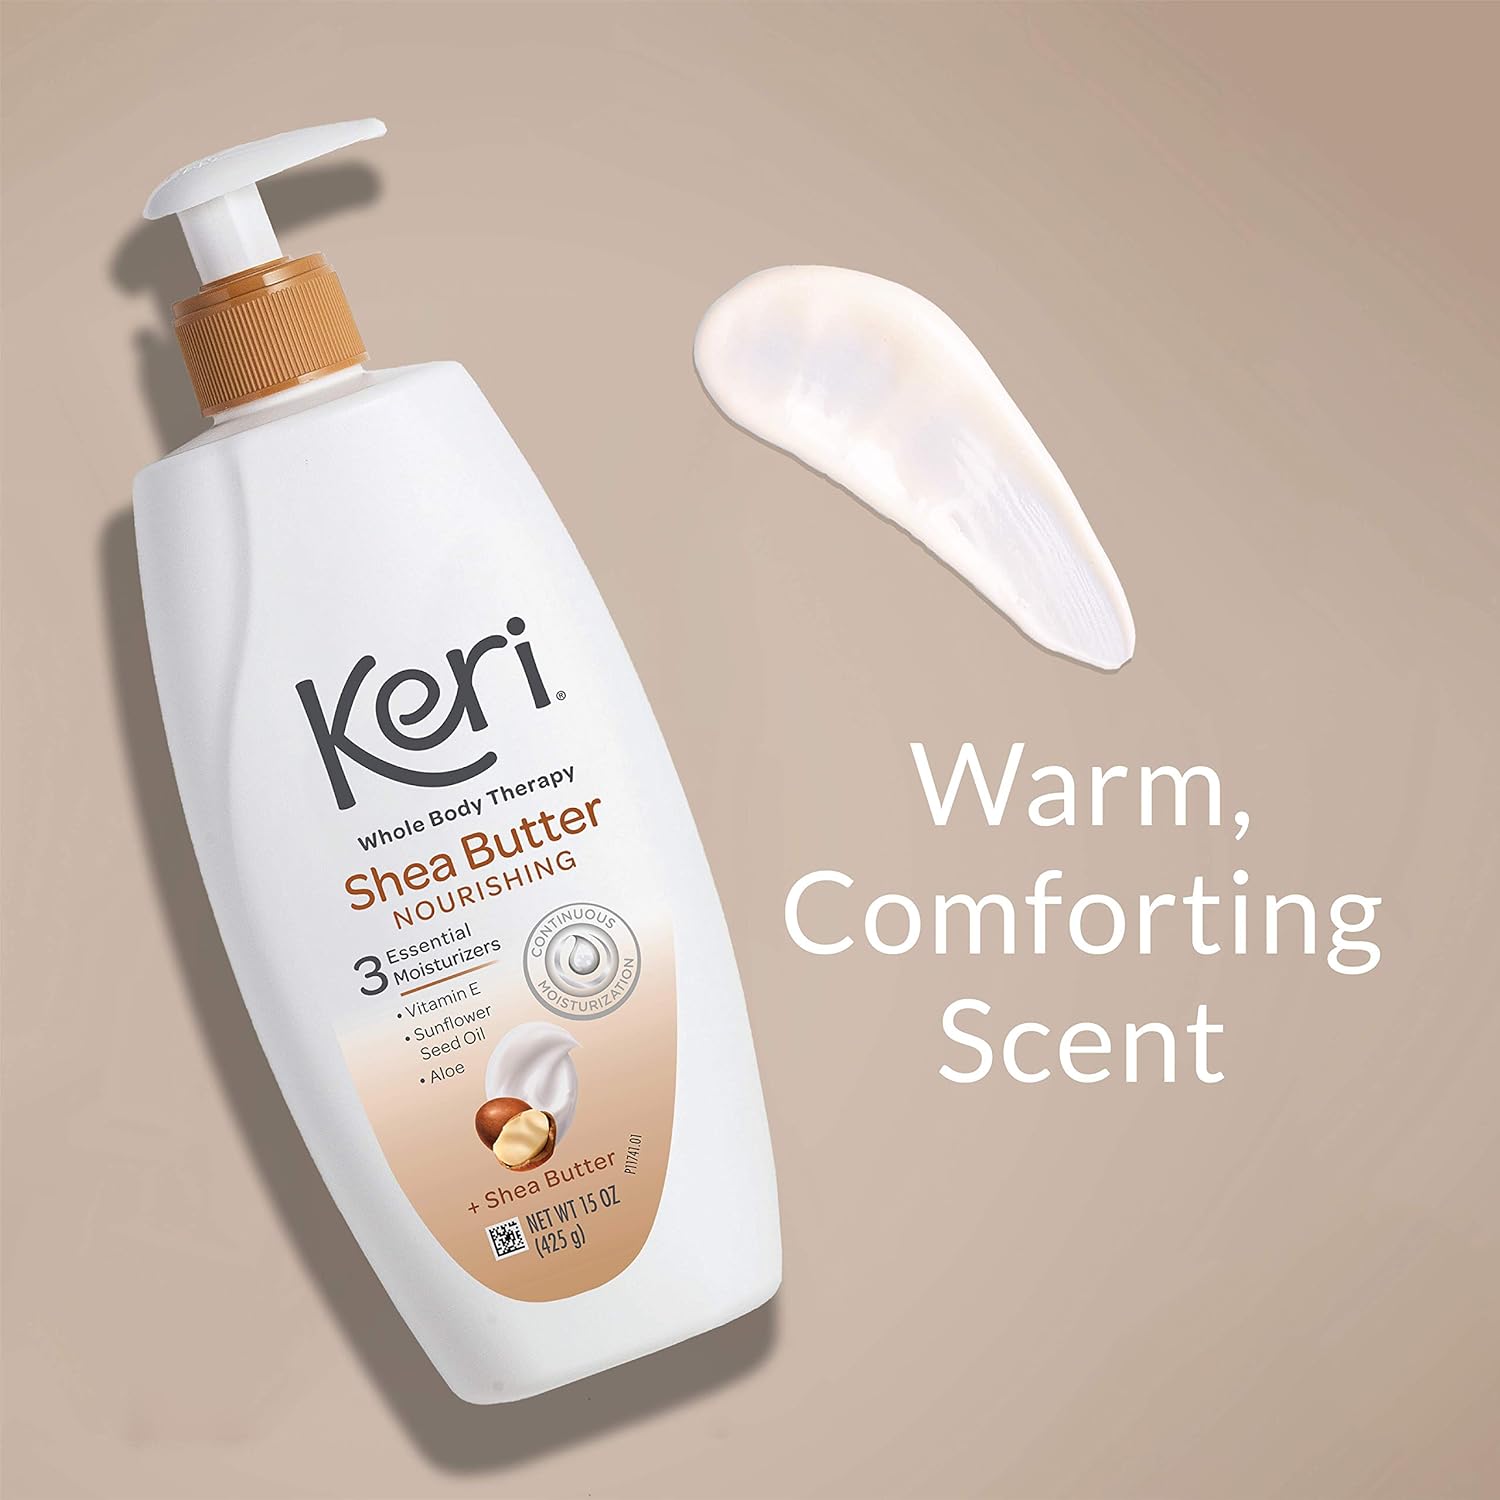 Keri Whole Body Therapy Original Shea Butter Lotion, Continuous Moisturization, 3 Essential Moisturizers (Vitamin E, Aloe and Sunflower Seed Oil) 15 oz. : Beauty & Personal Care